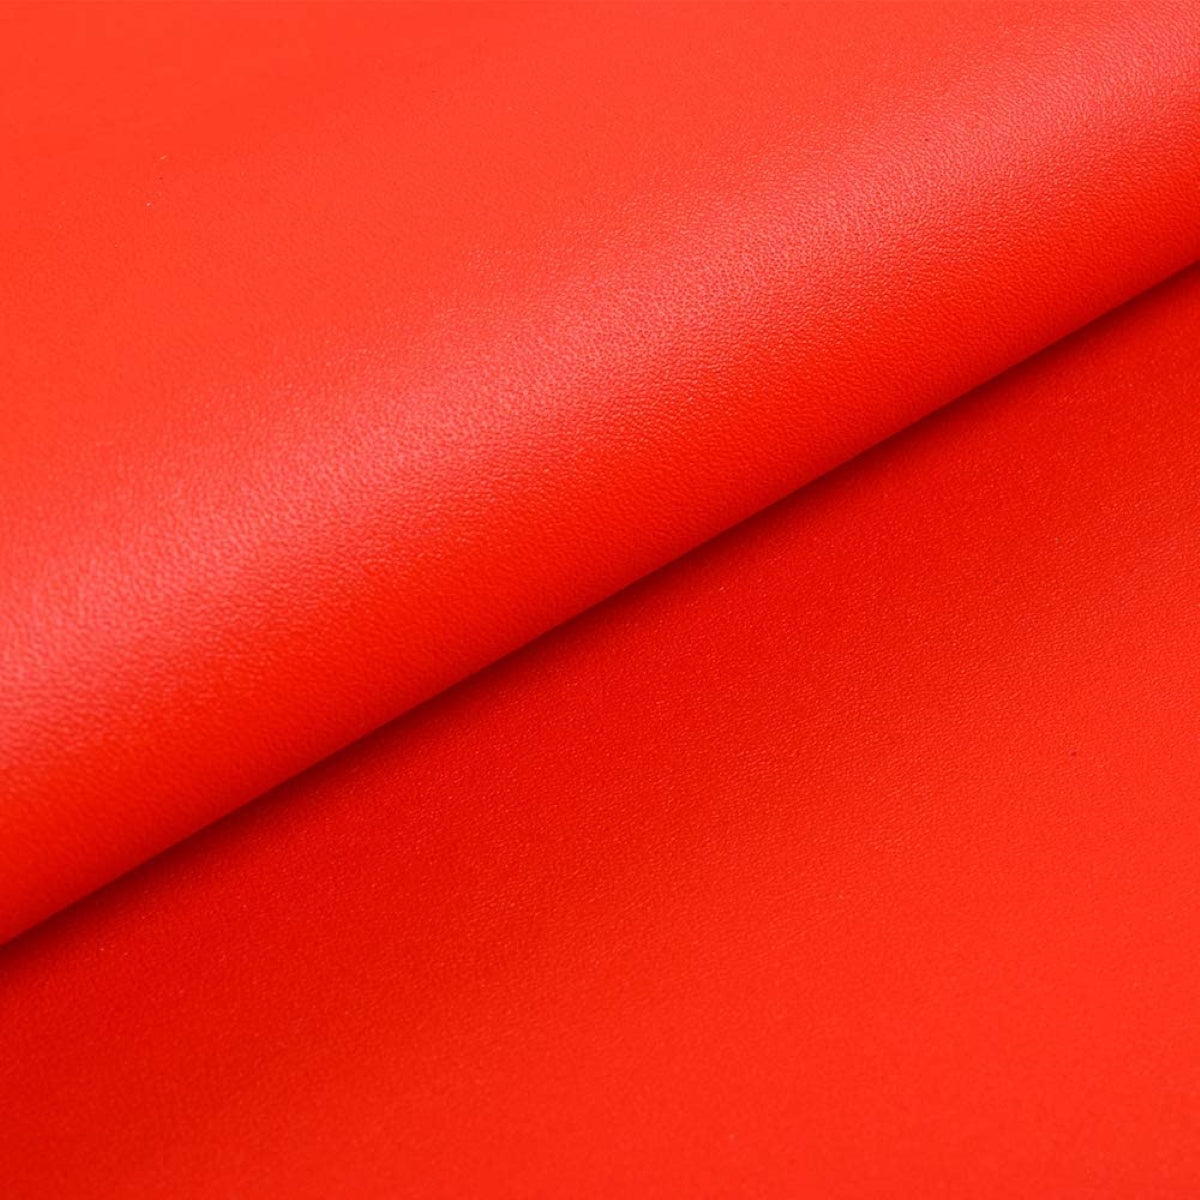 Bowzar Lama Rexine Artificial Leather Leatherette for Upholstery Sofa Chair